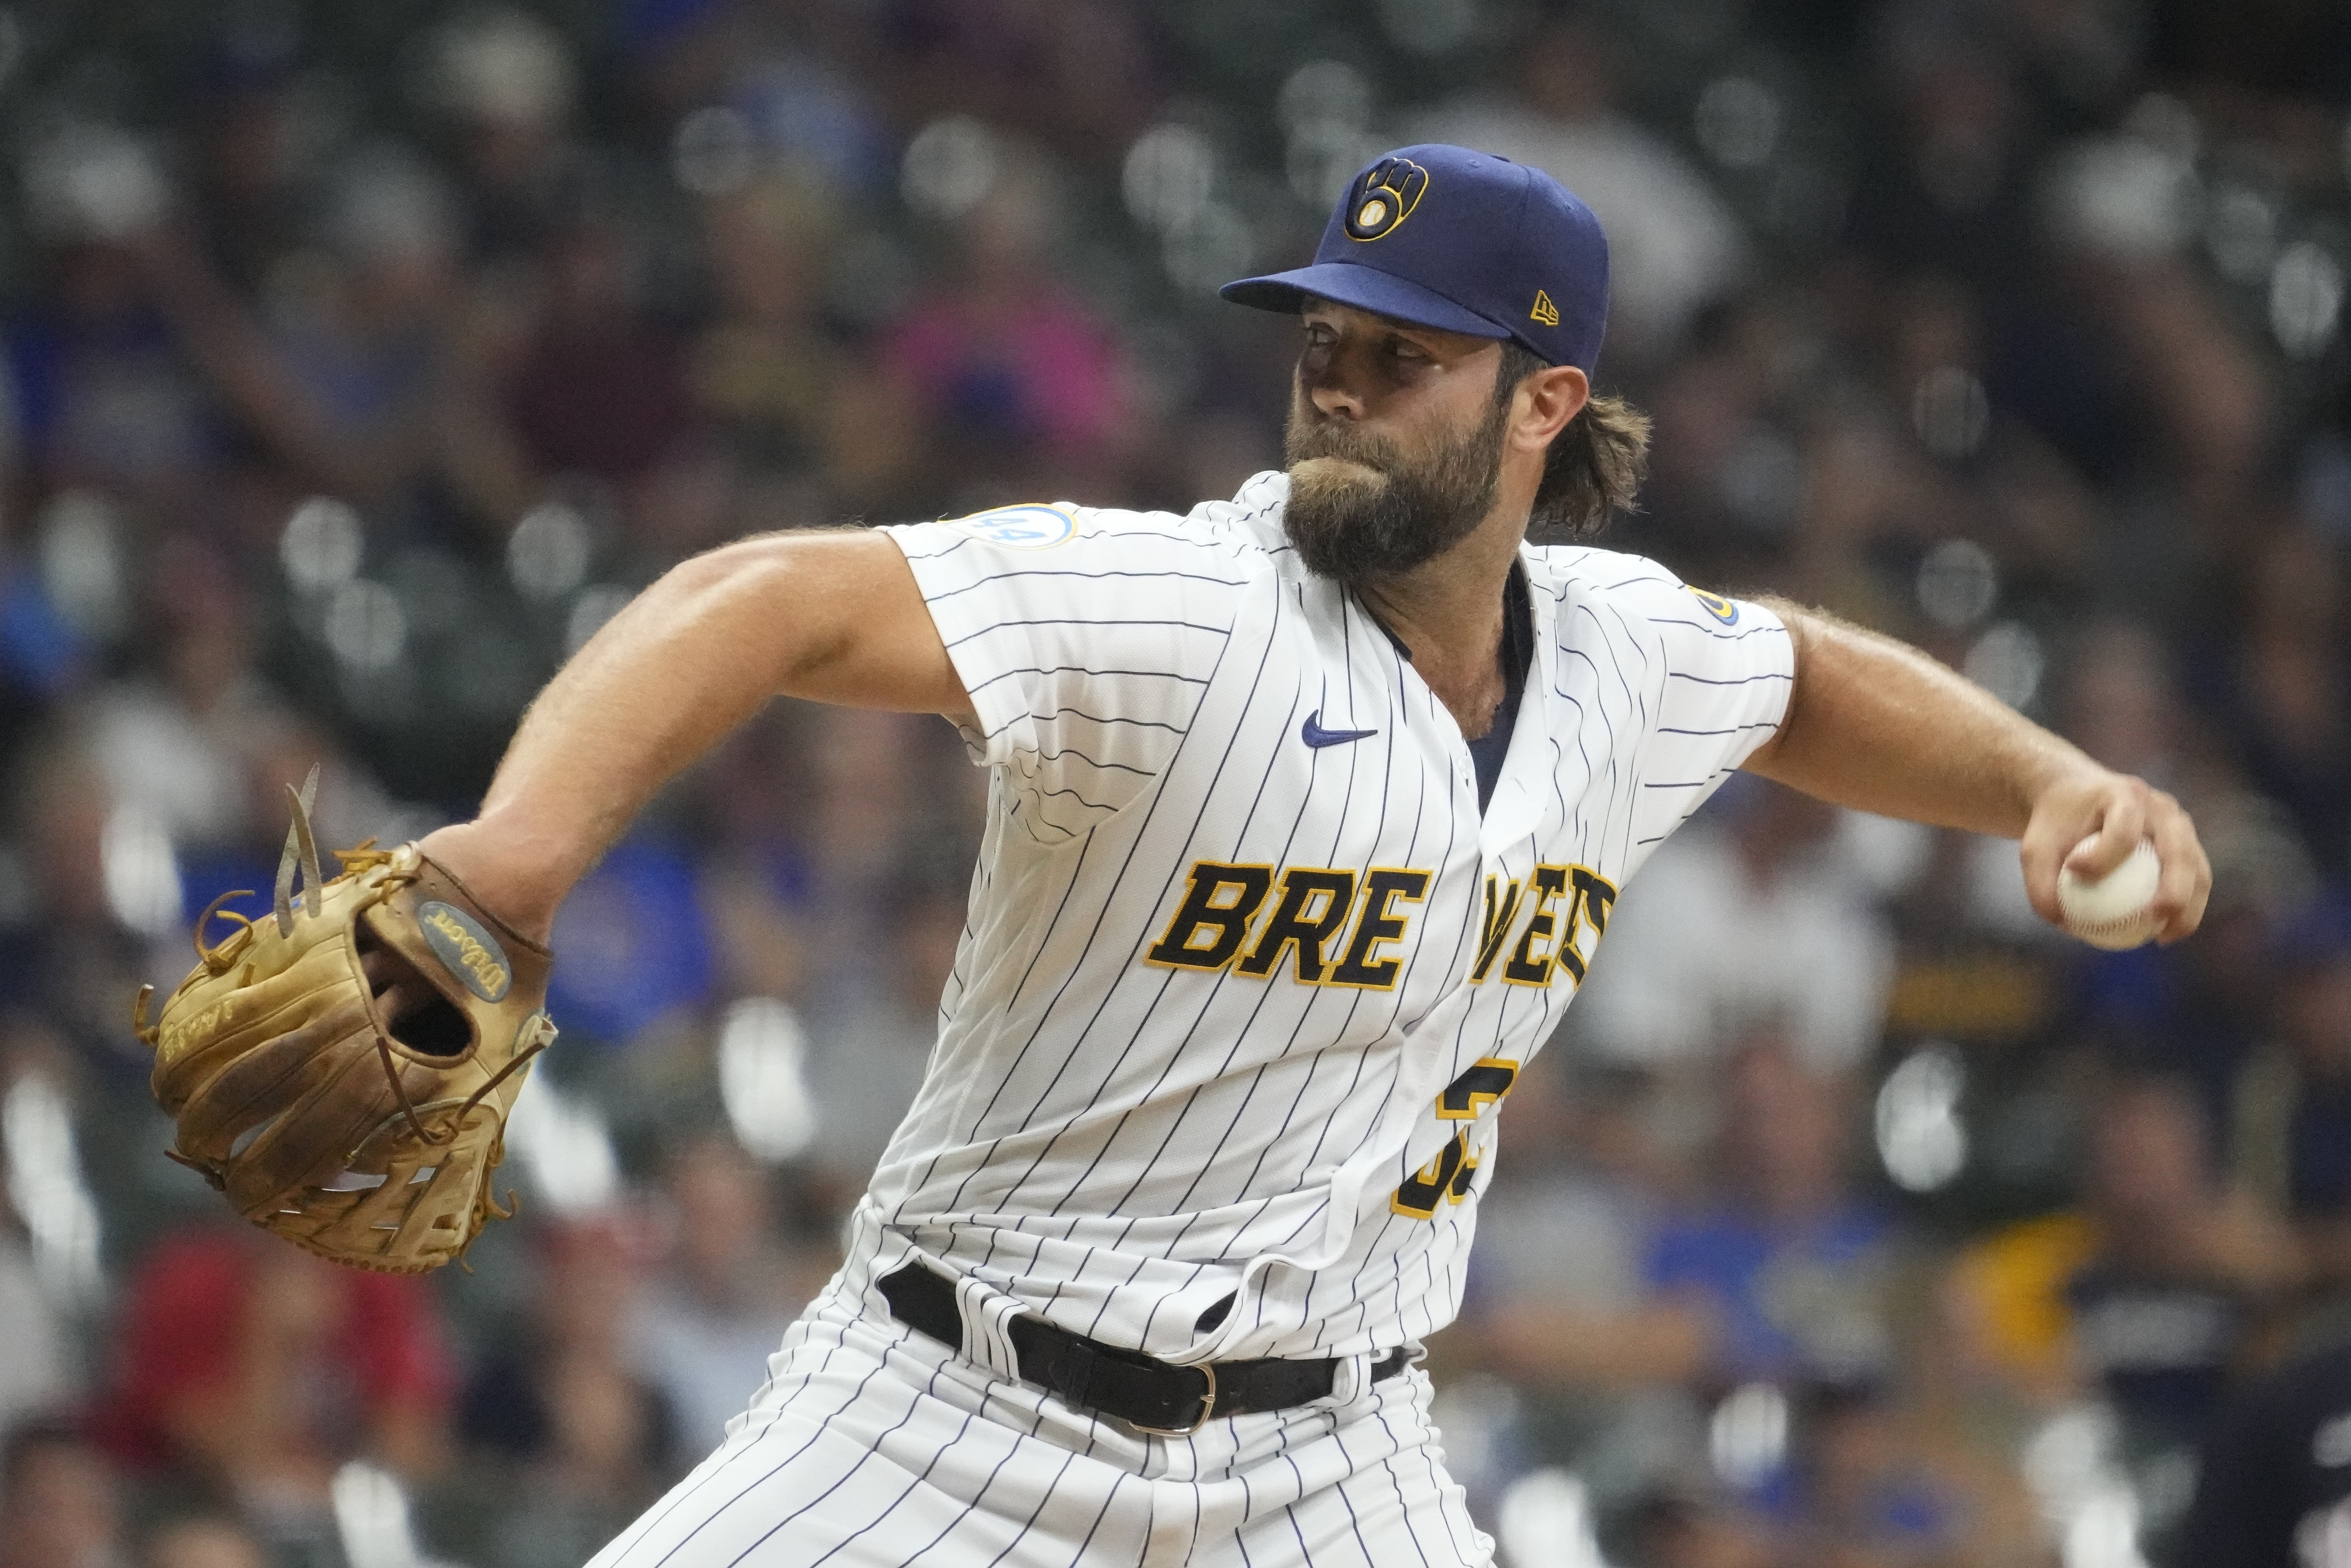 Daniel Norris is back at Comerica Park this week. Will he be back